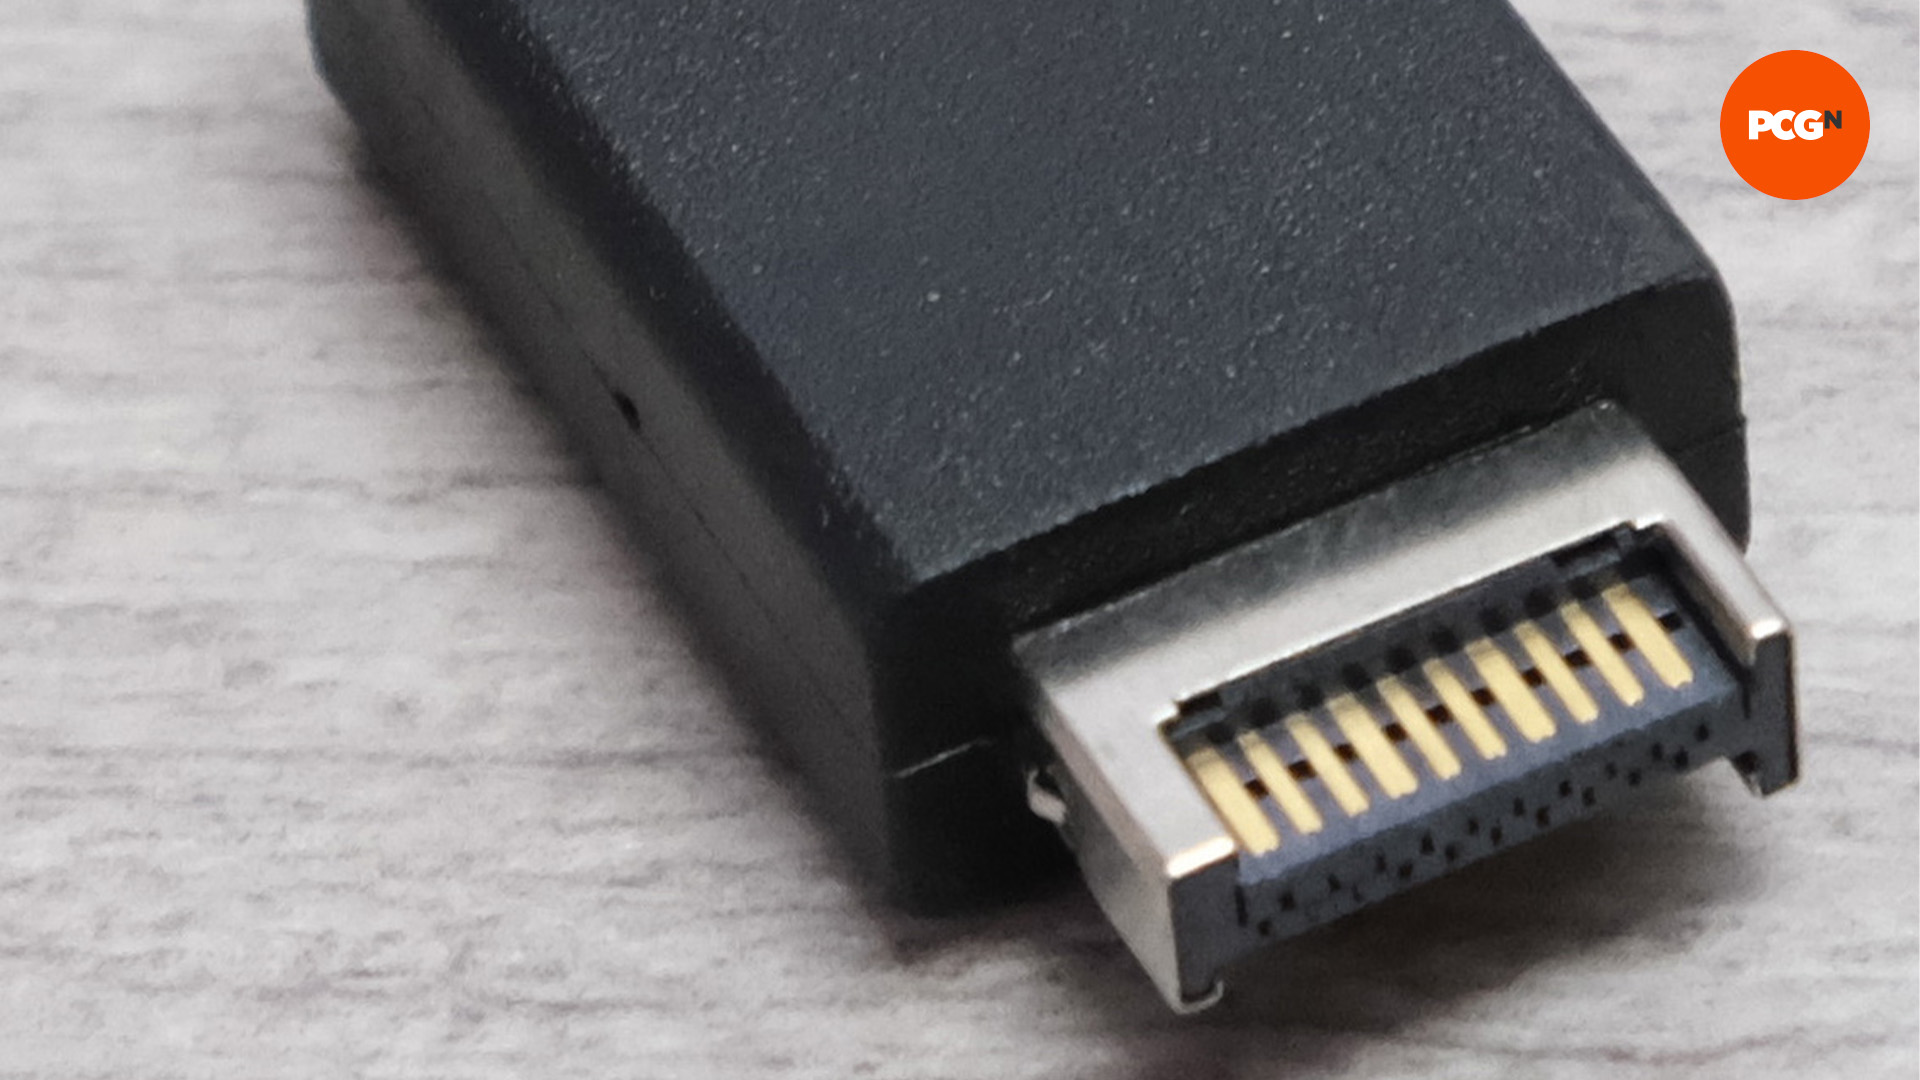 The chunky USB-C plug for the motherboard